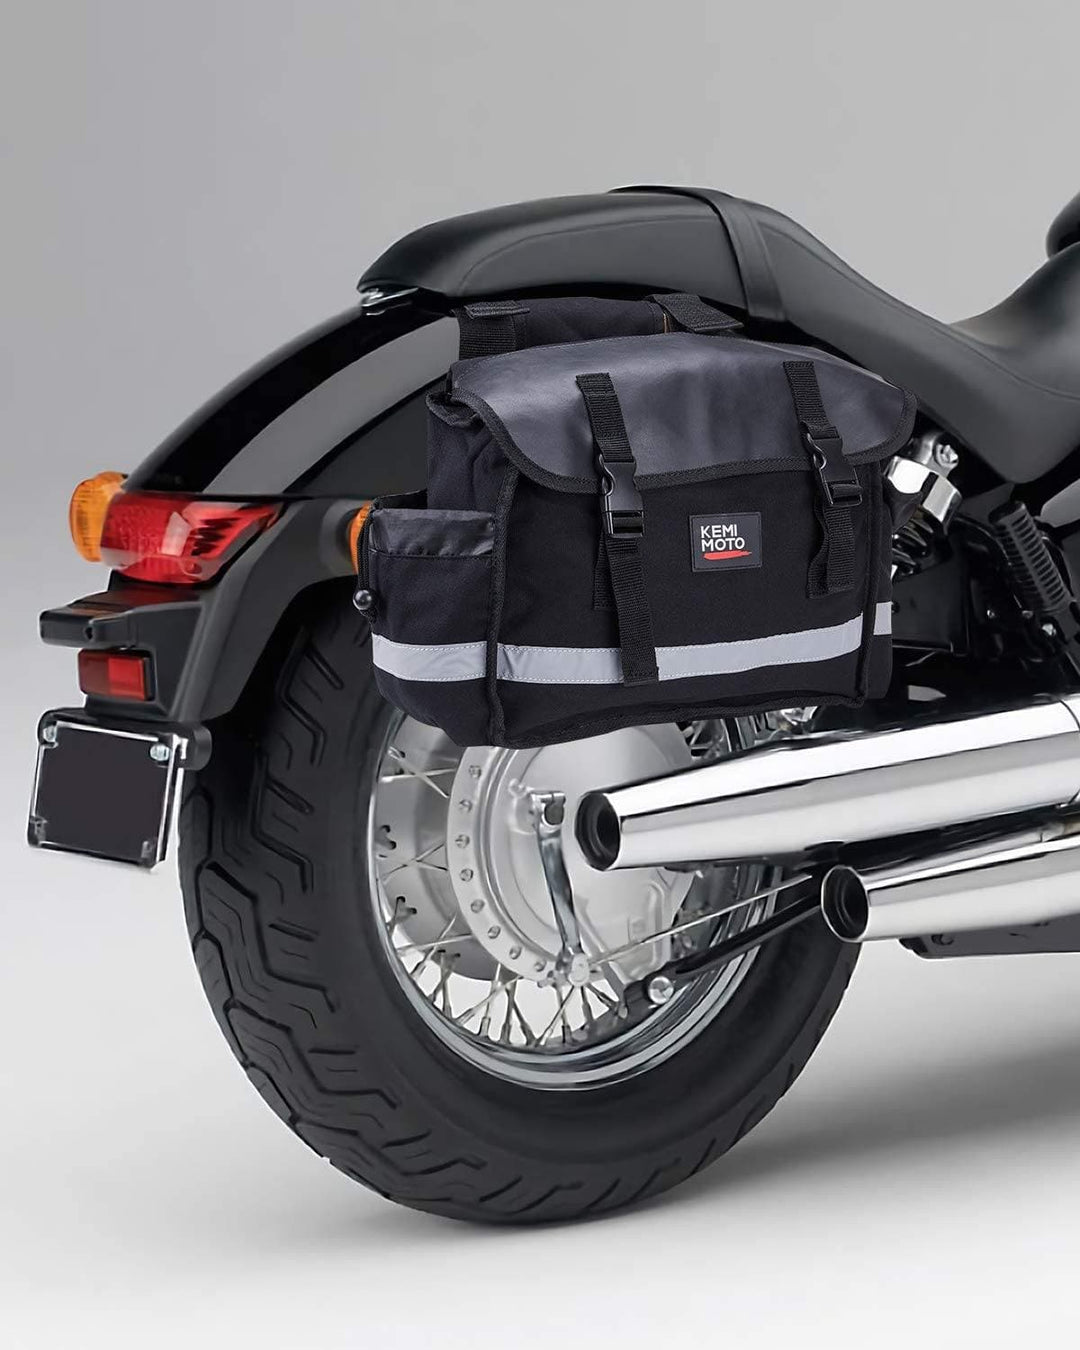 Get More Out of Your Motorcycle With Kemimoto Accessories